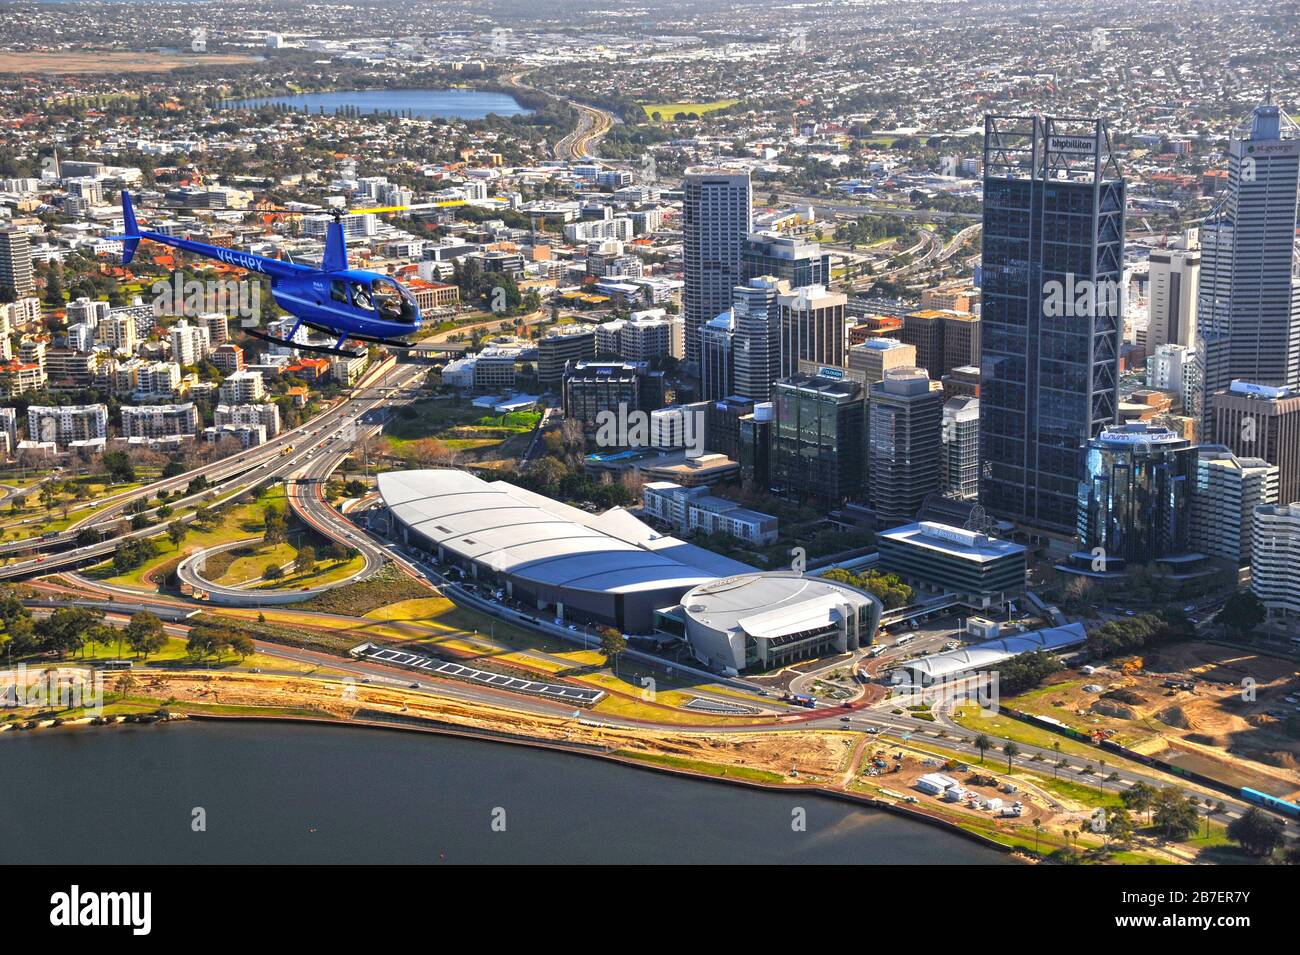 An air to air image of a Robinson R44 helicopter on a scenic flight over the city of Perth, Western Australia. Stock Photo